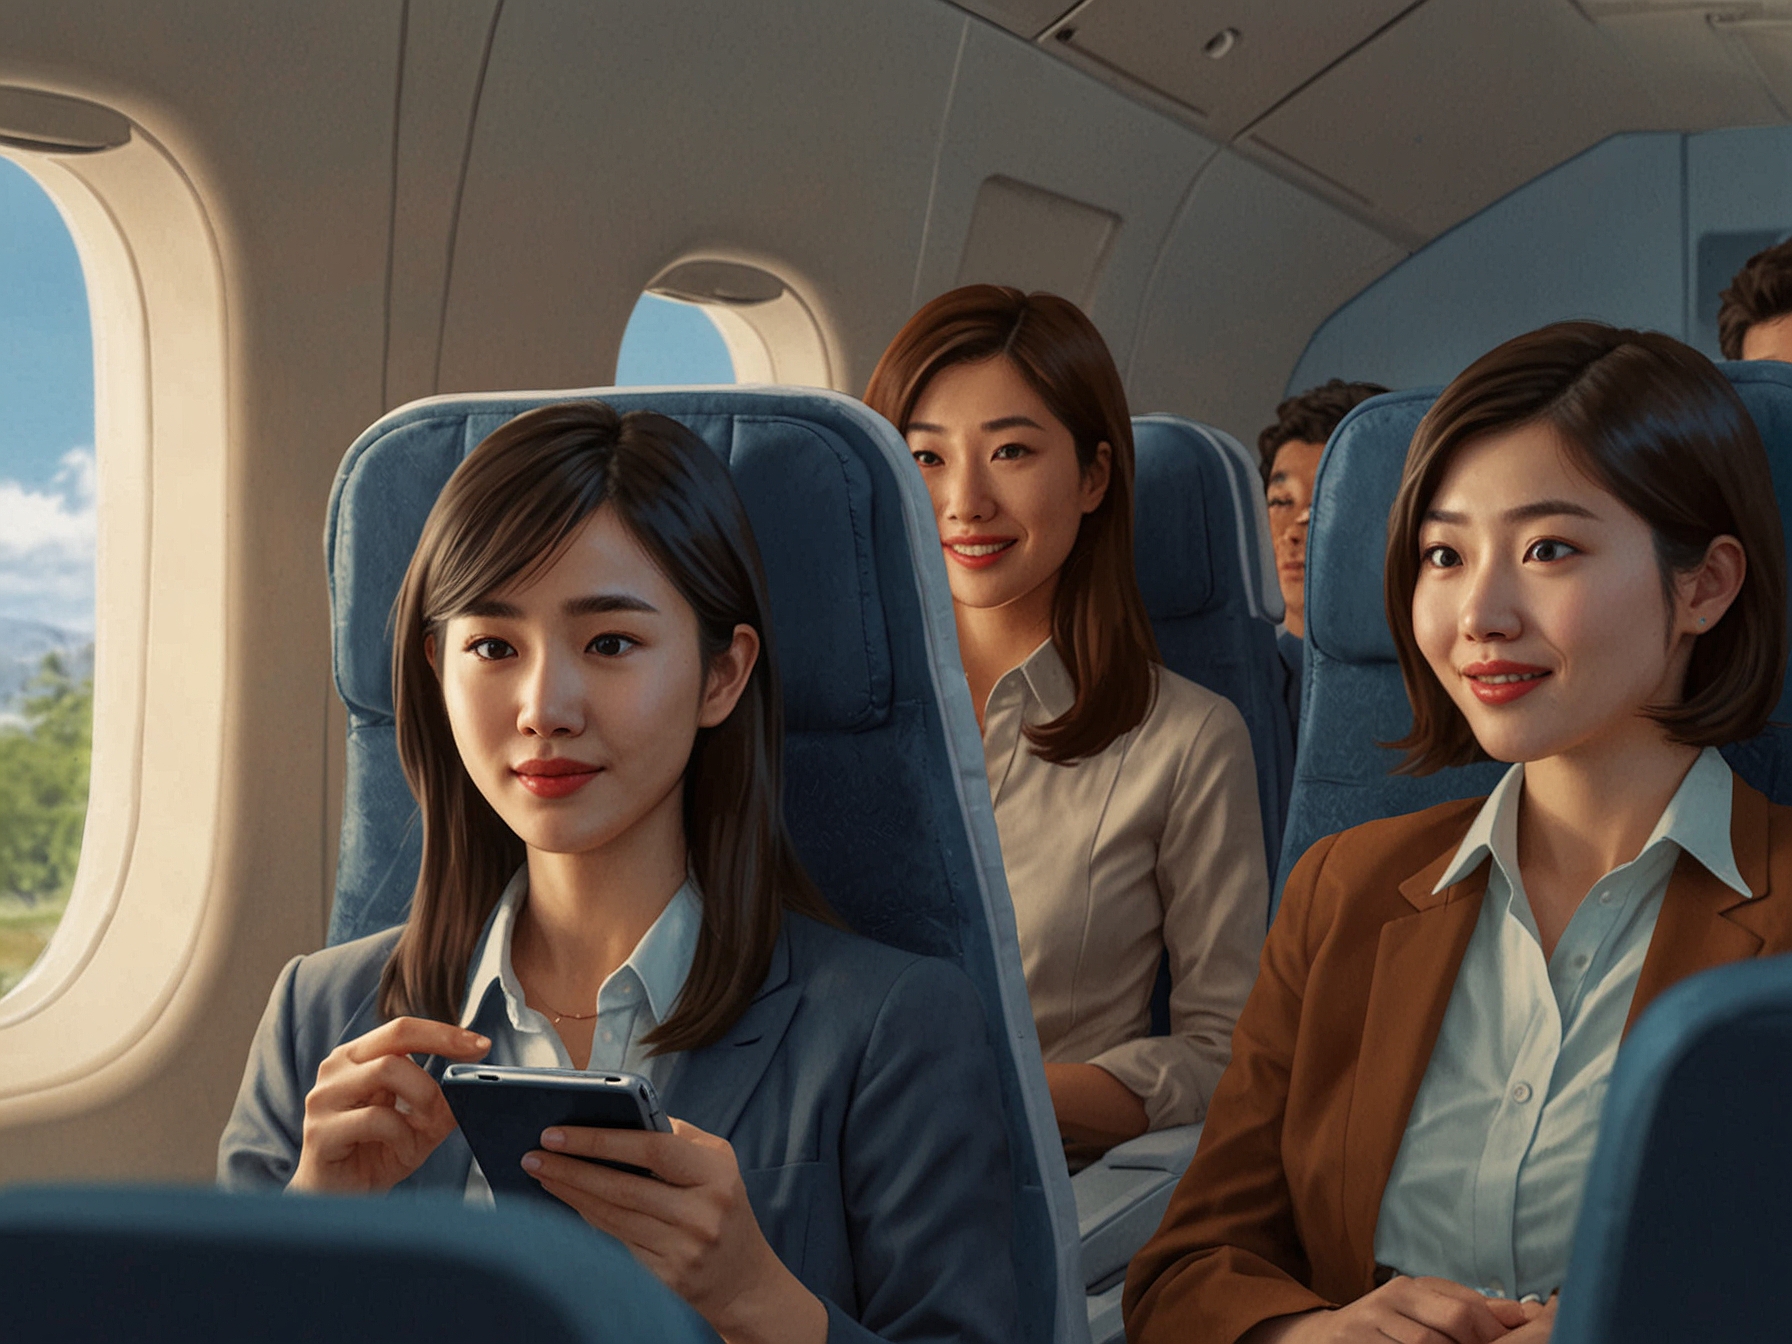 Airline passengers viewing an in-flight video message detailing acceptable behavior and consequences for harassment, part of the communication strategy by JAL and ANA.